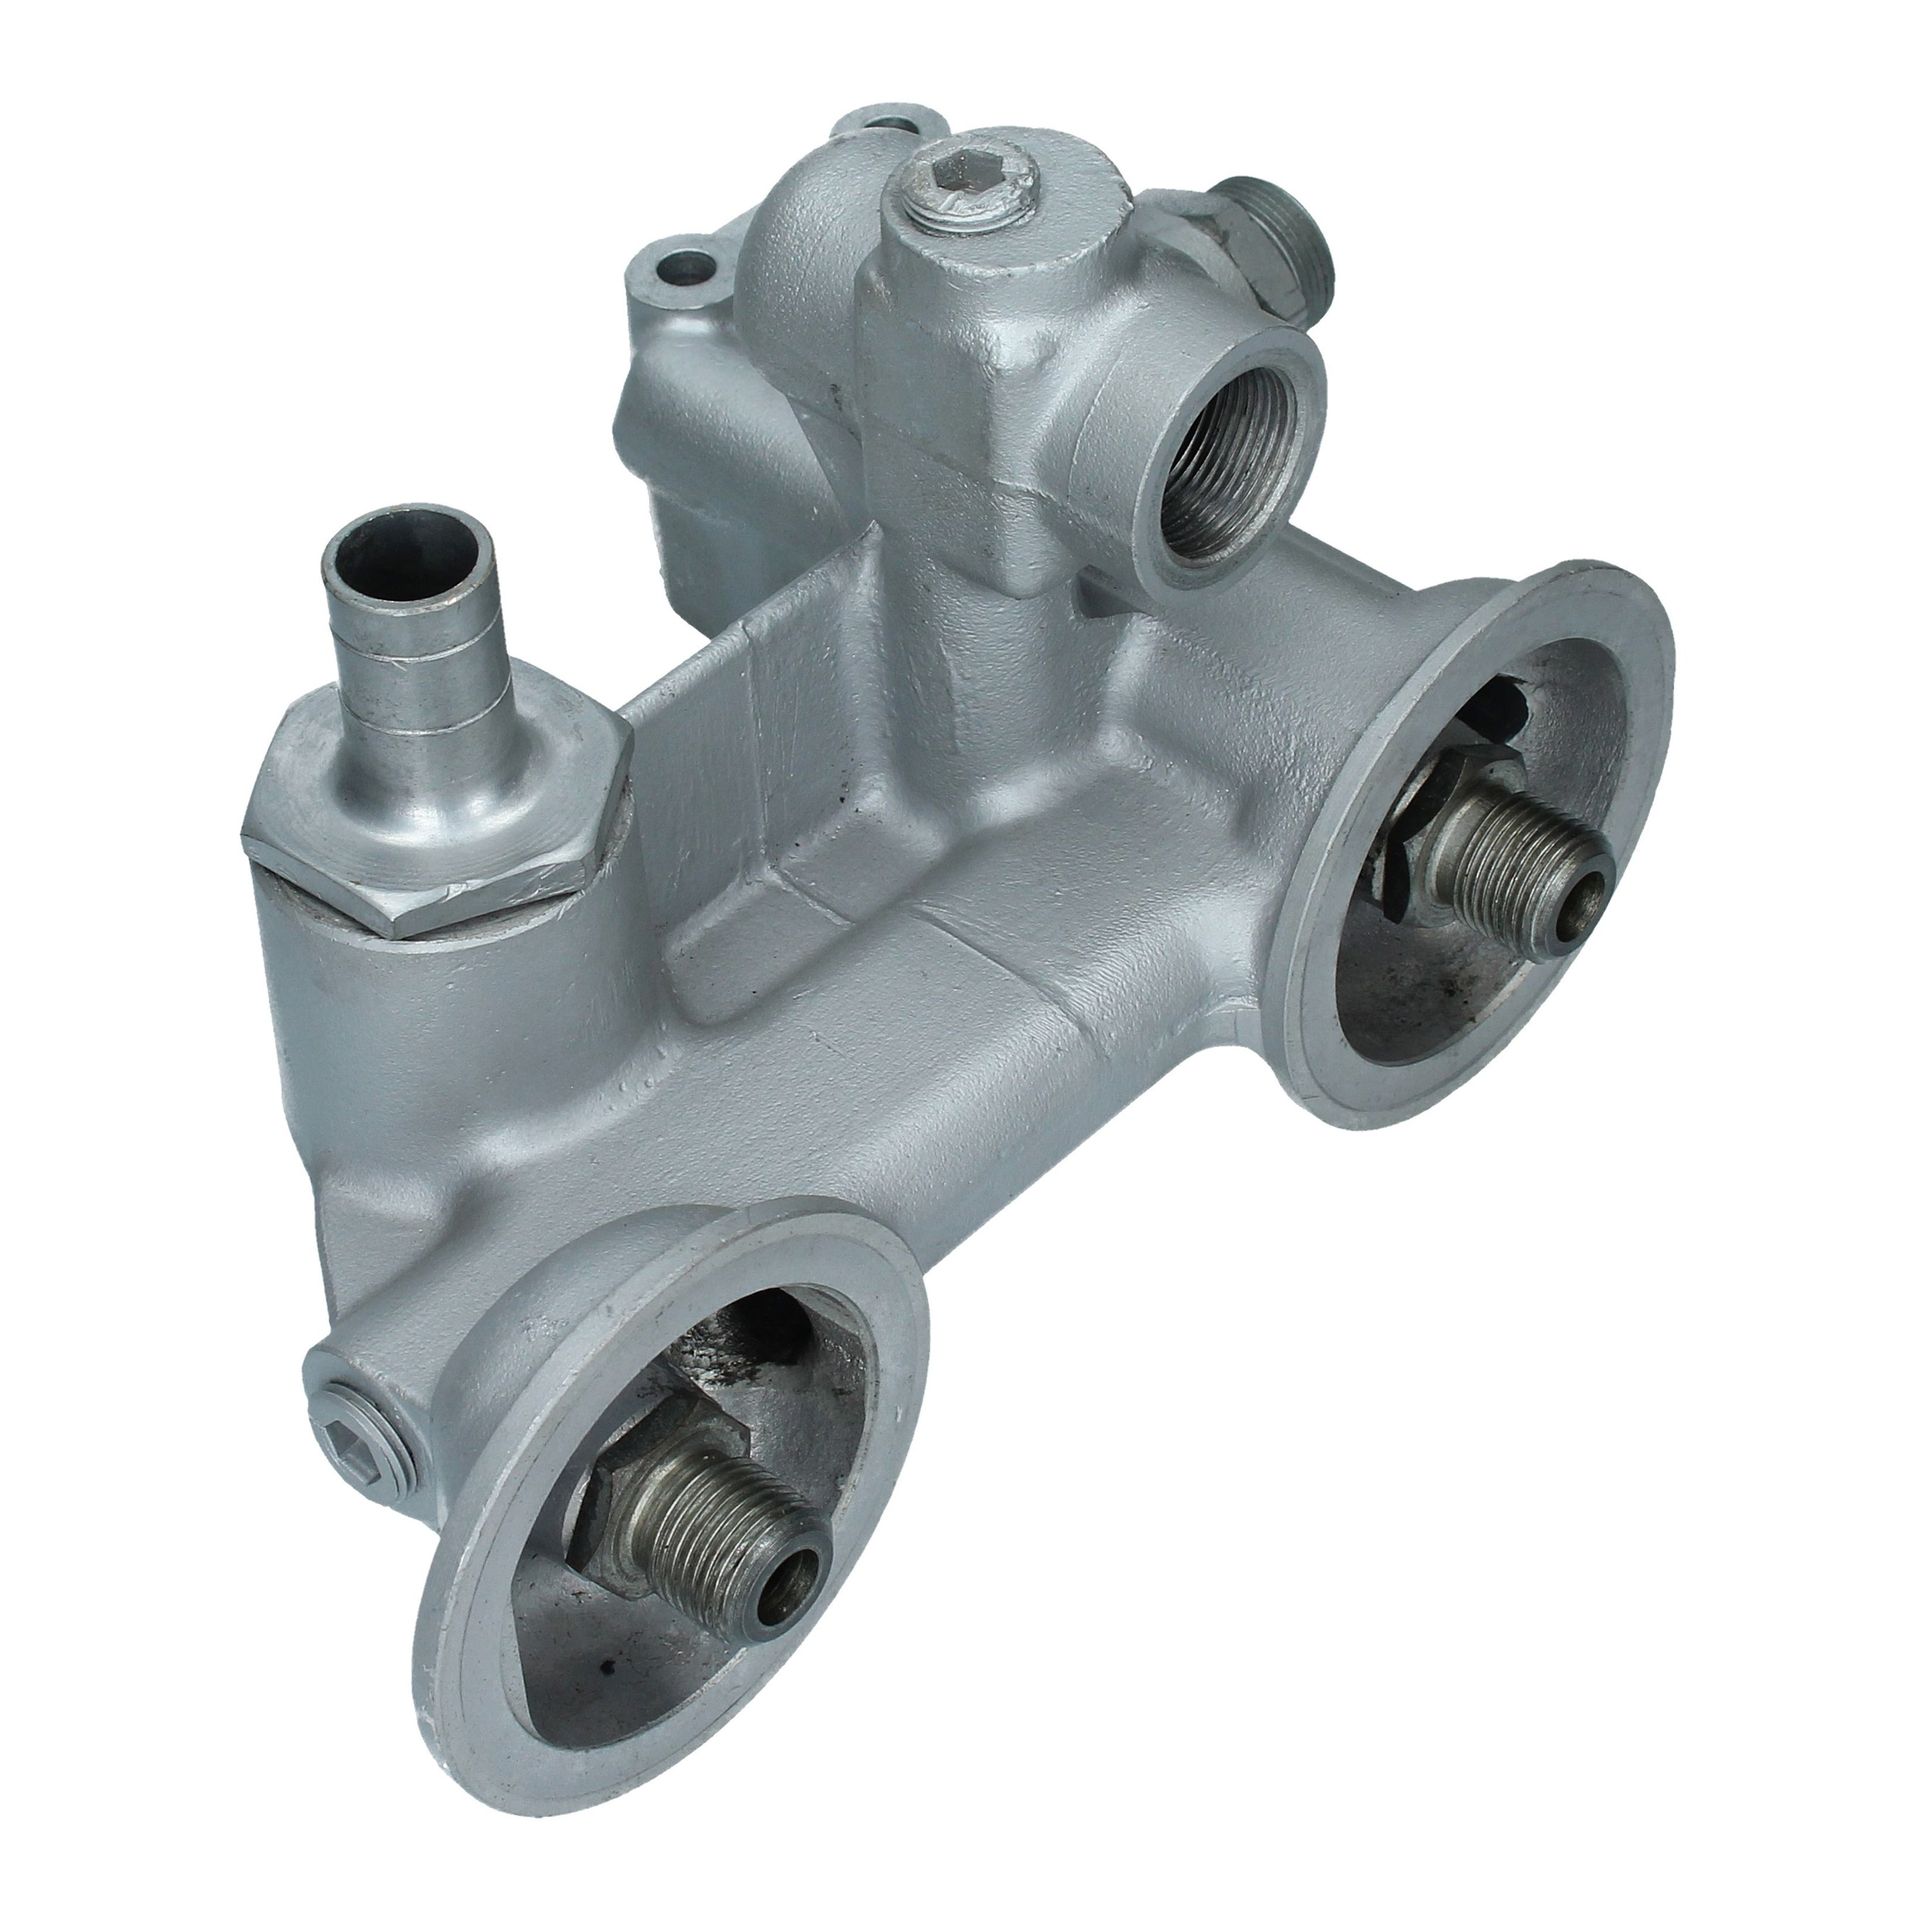 Twin Oil Filter Housing with PRV